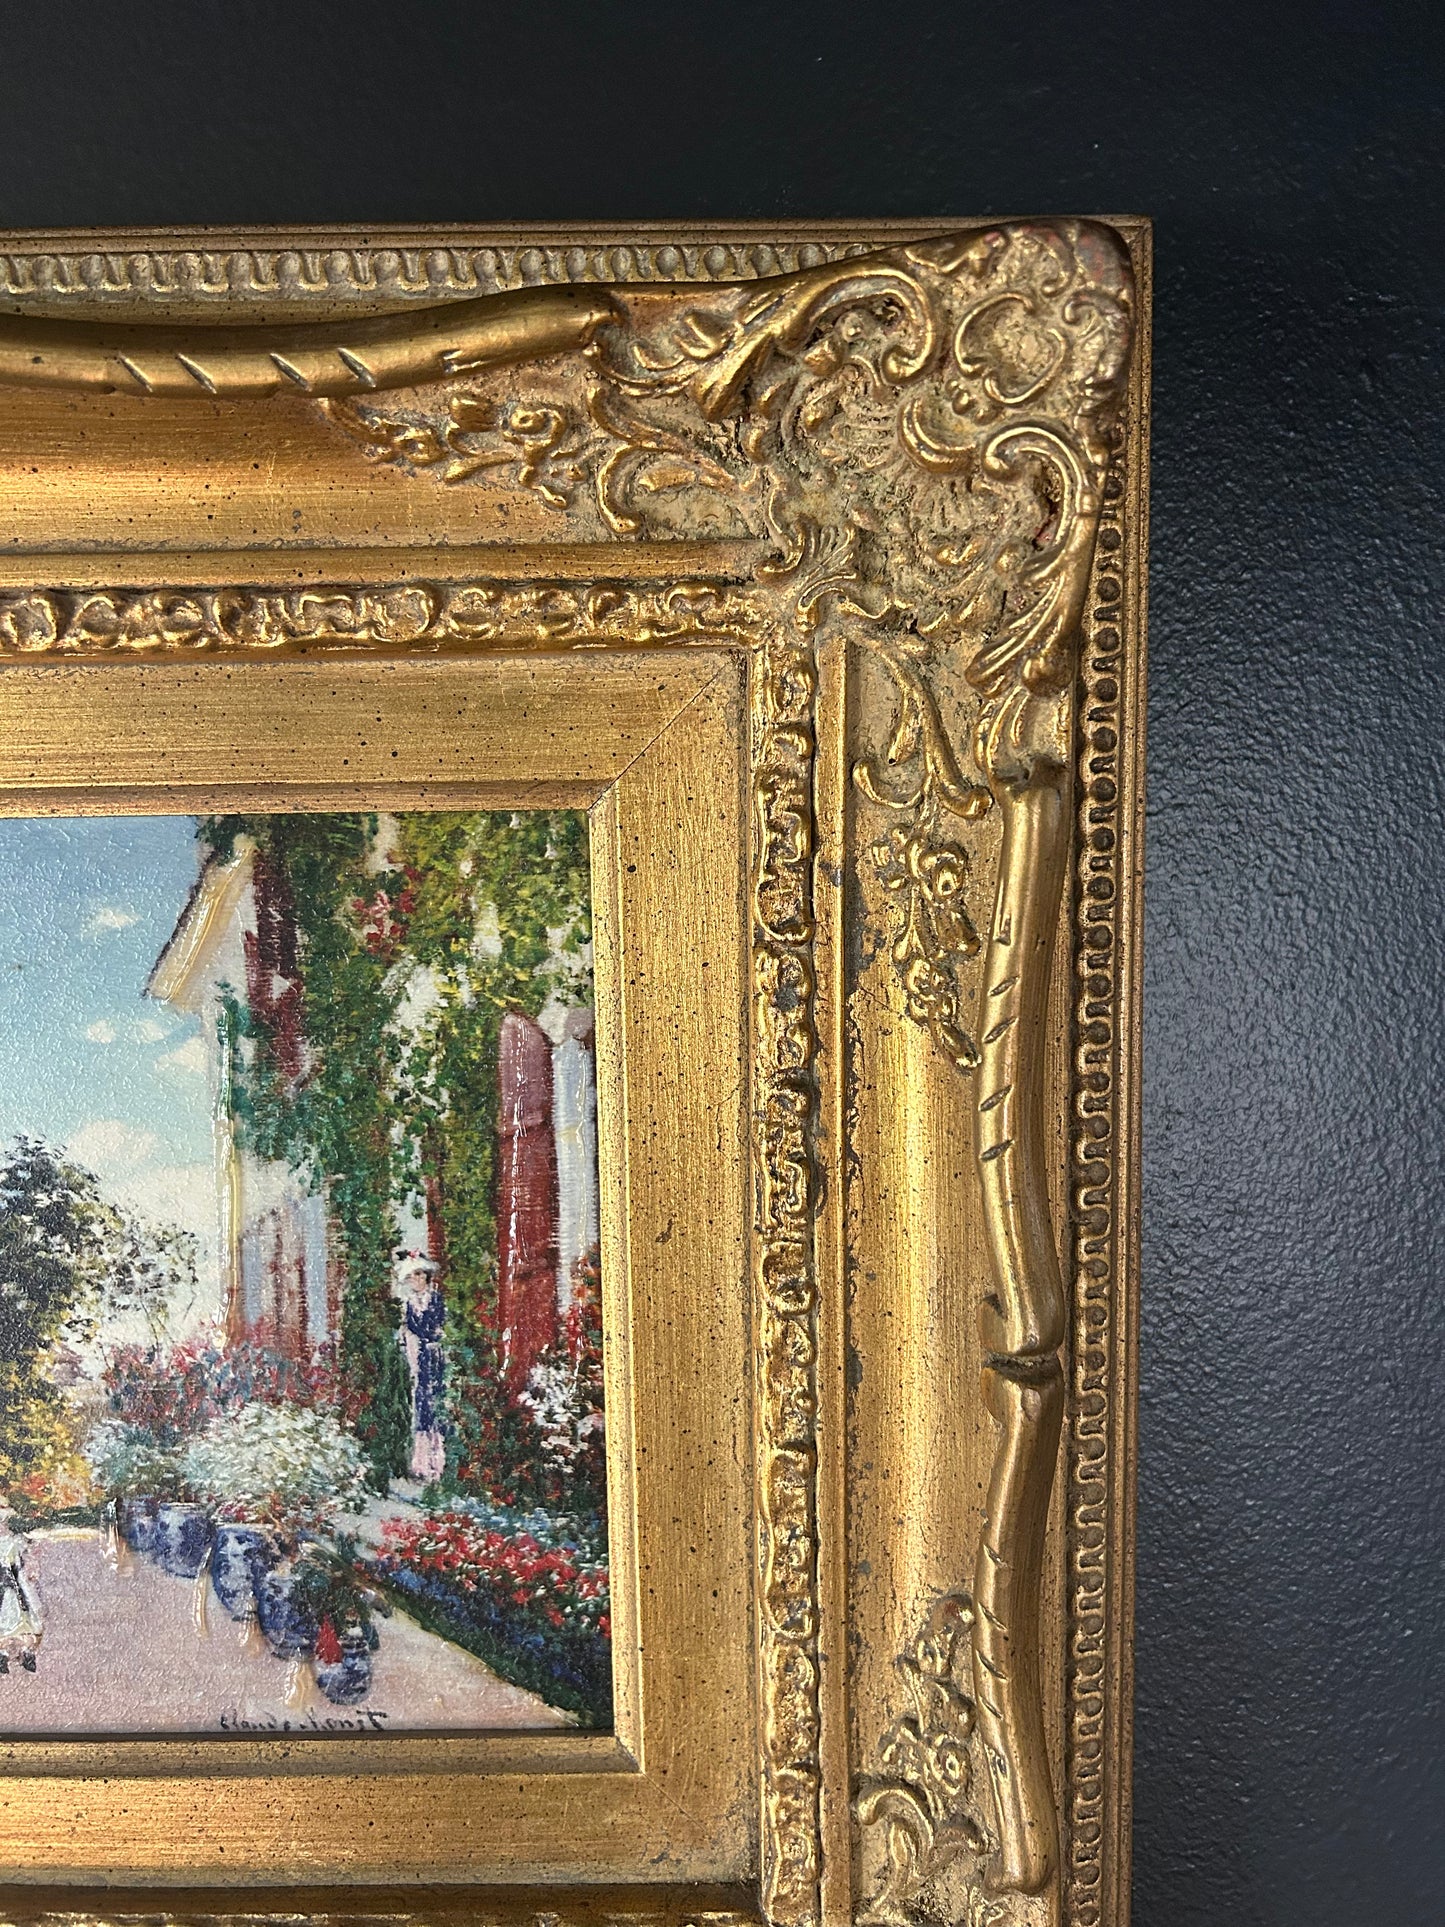 Monet 'Artist's House' reproduction with gilded frame